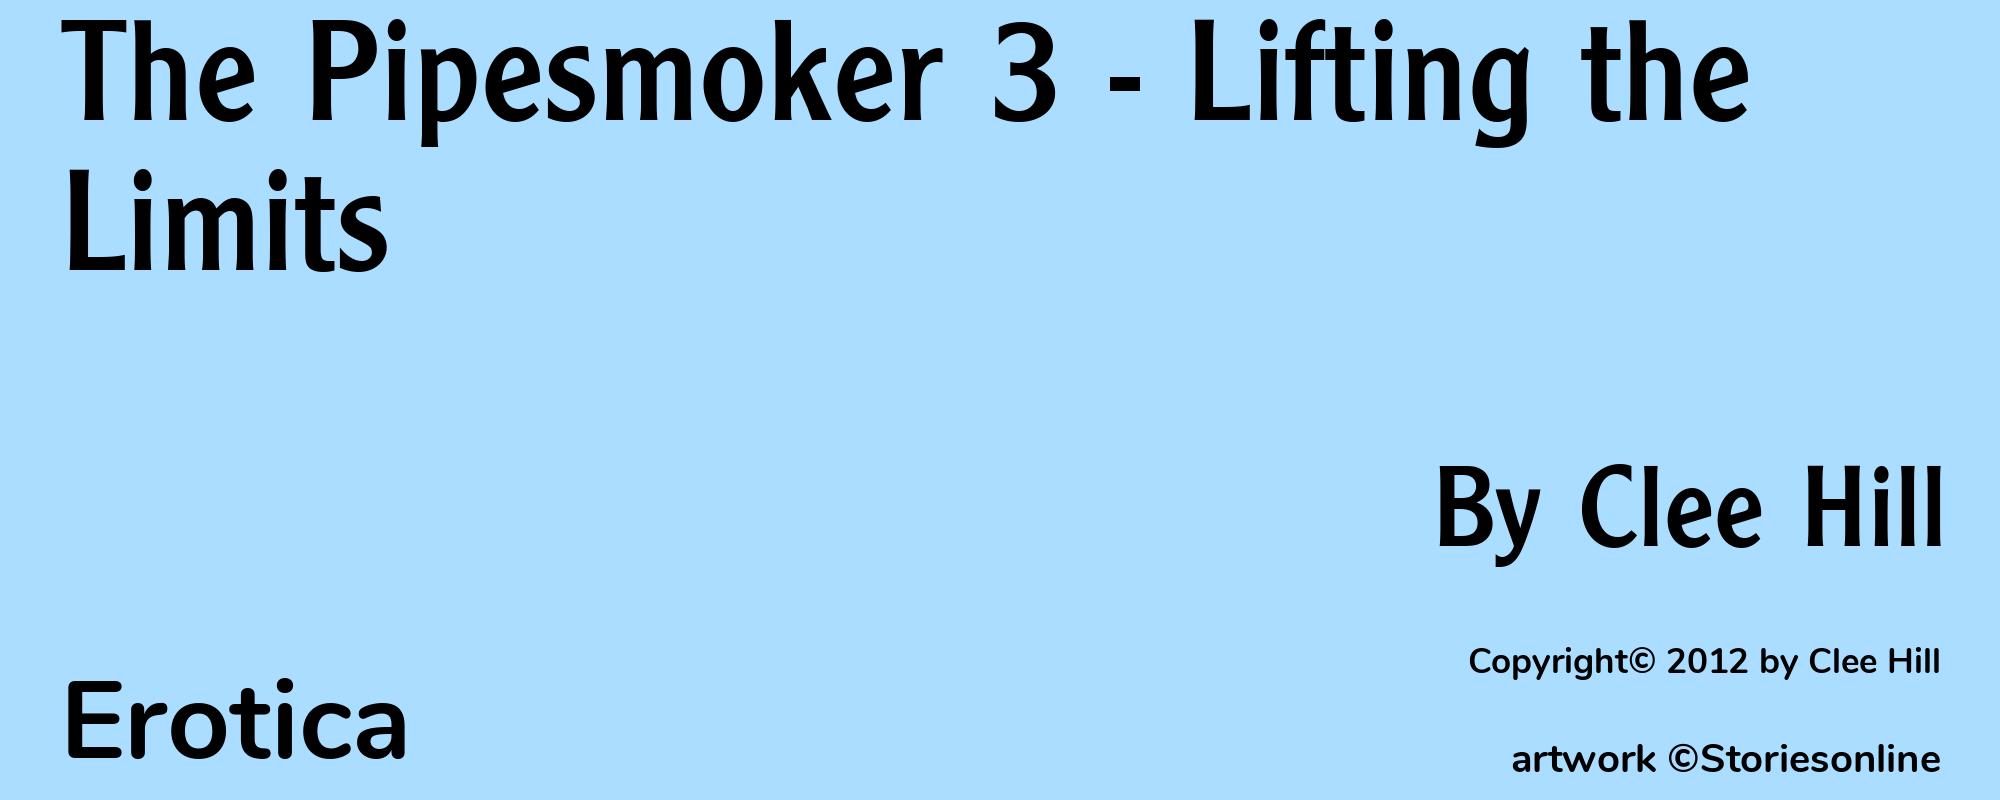 The Pipesmoker 3 - Lifting the Limits - Cover